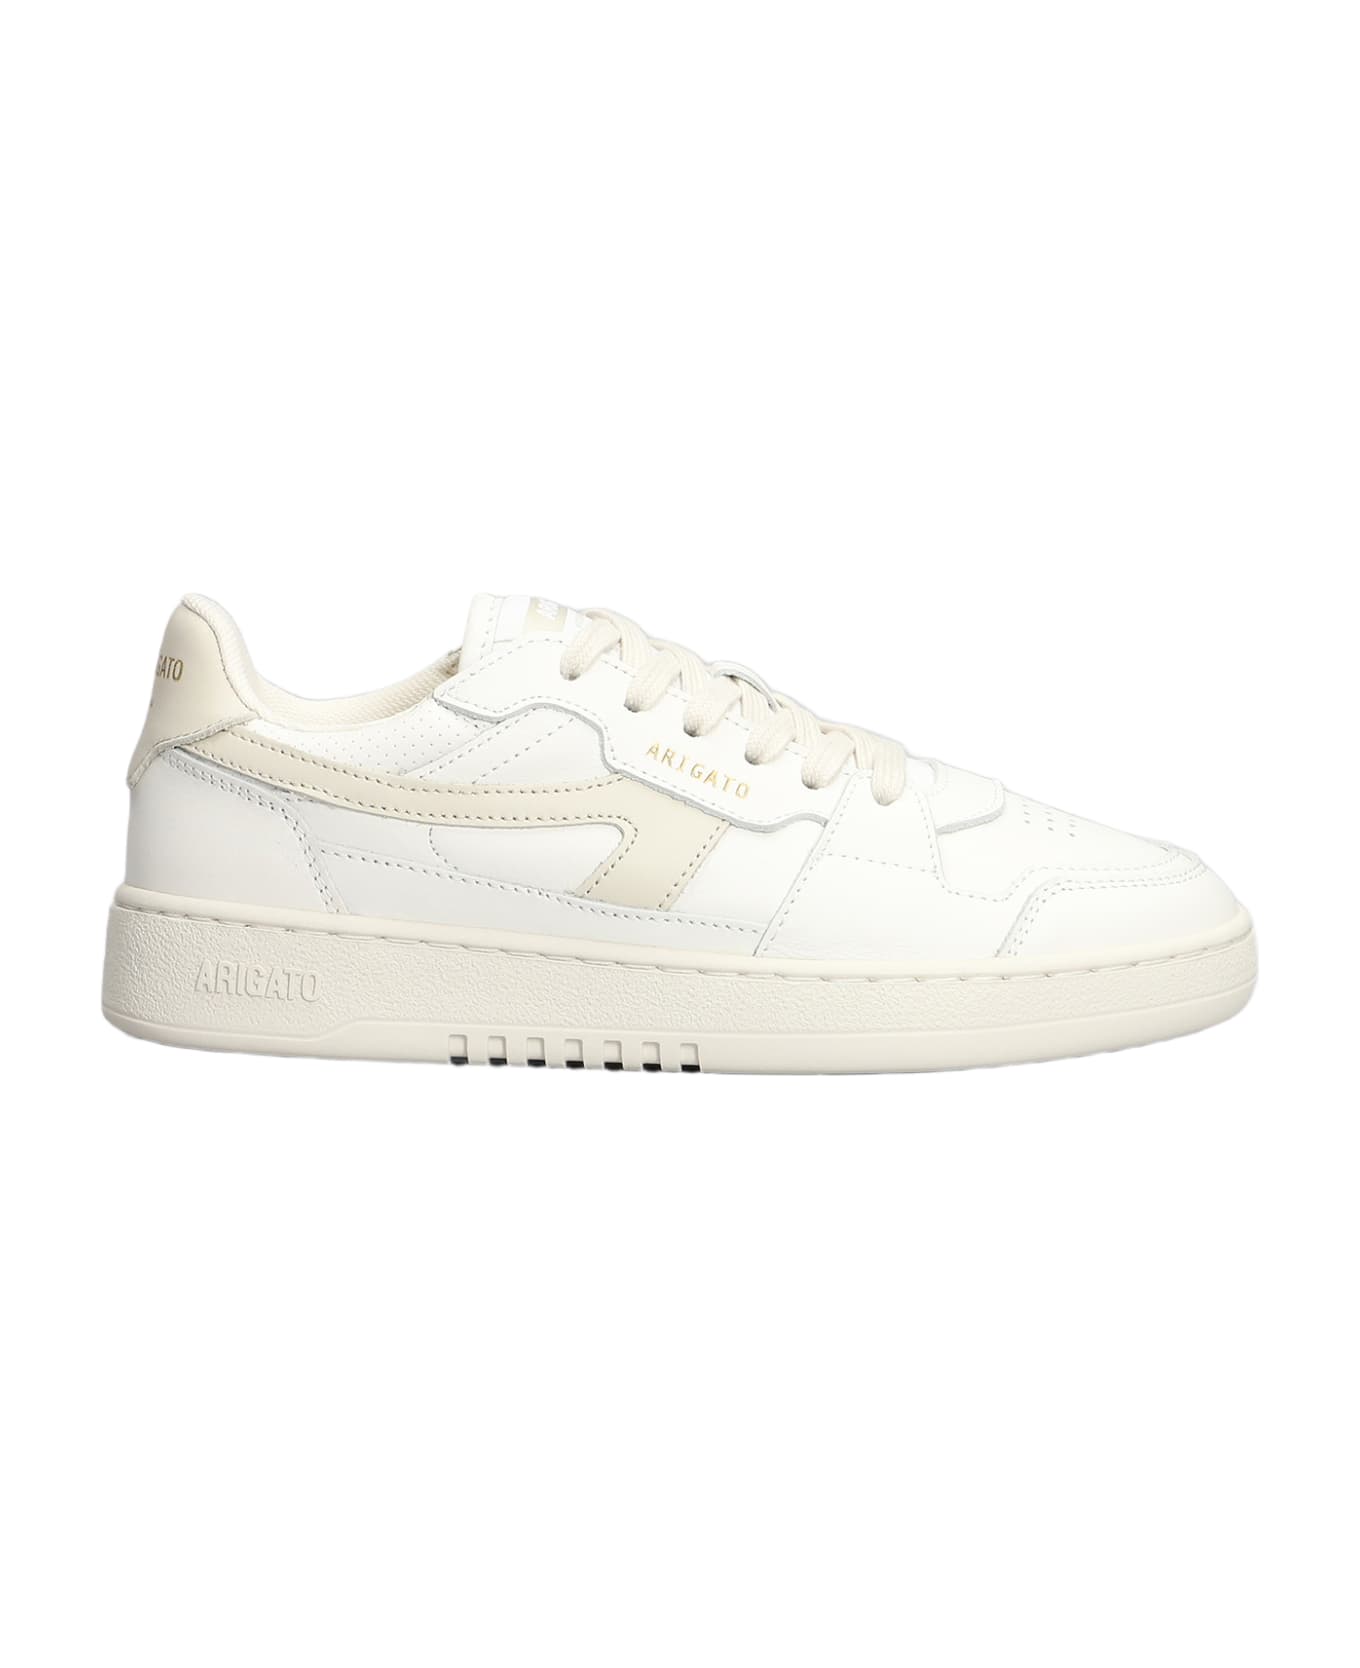 Axel Arigato Dice-a Sneaker Sneakers In White Leather - white